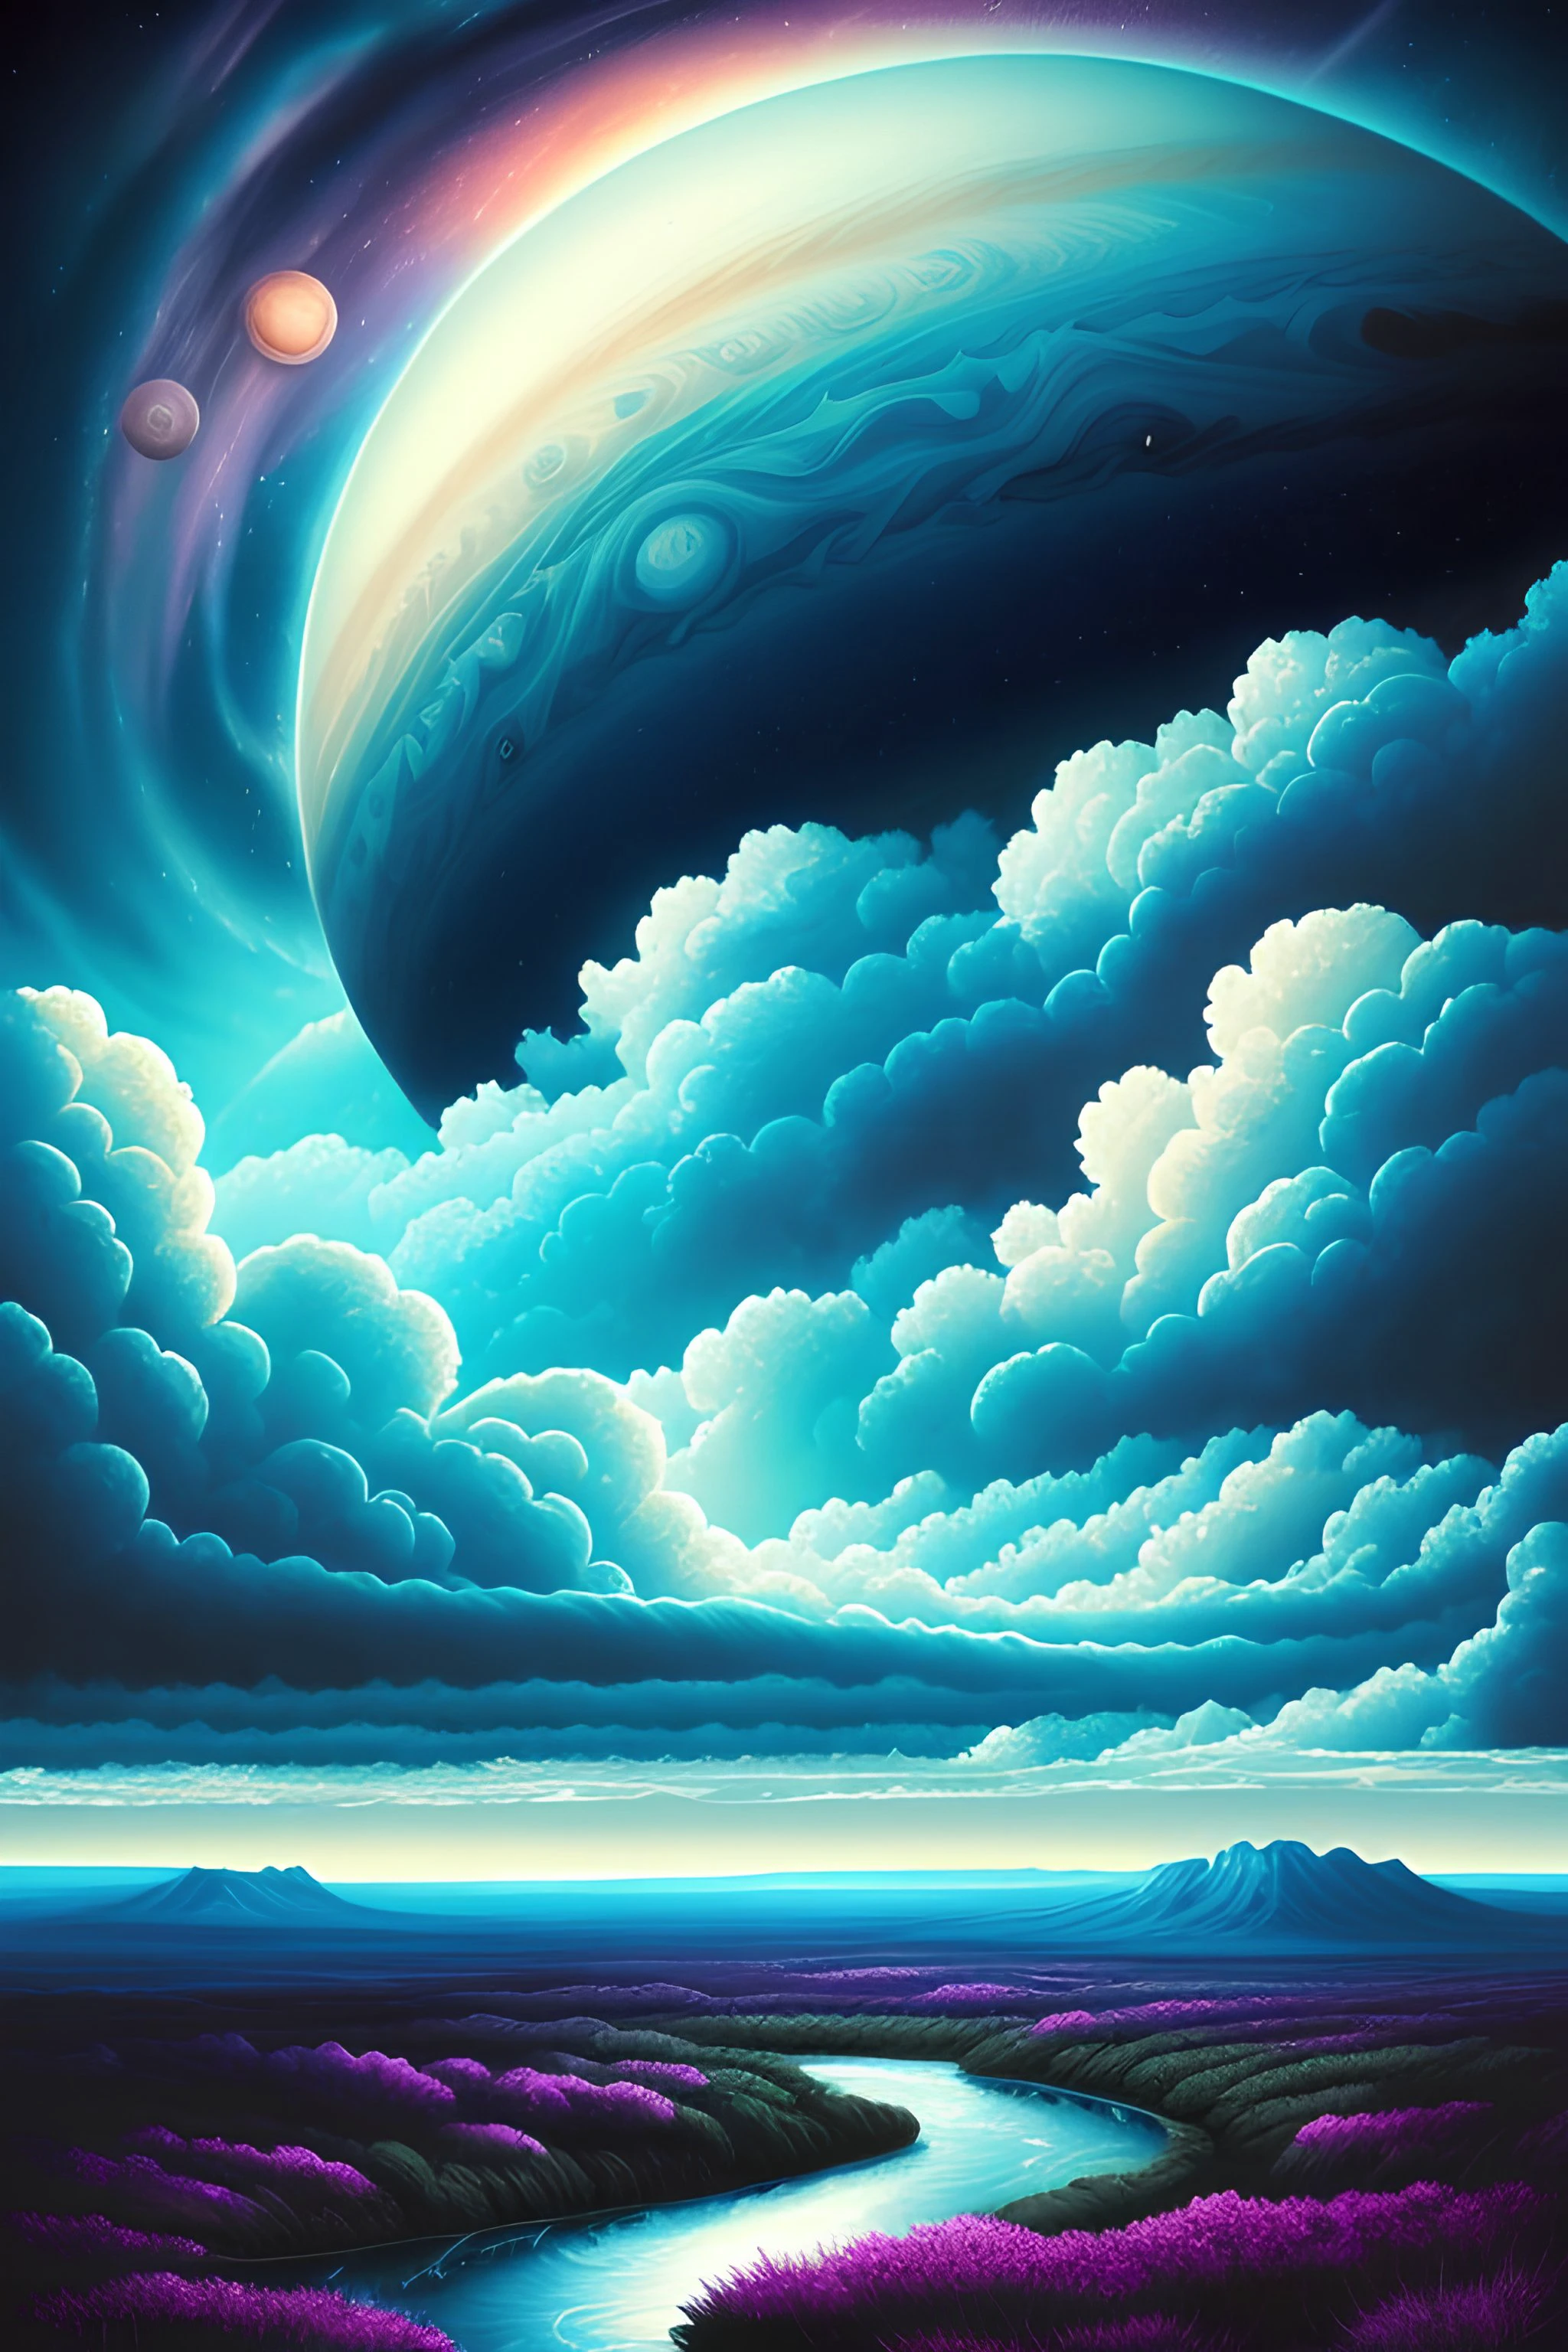 illustration of jupiter clouds by dan mumford, alien landscape and vegetation, epic scene, a lot of swirling clouds, high exposure, highly detailed, realistic, vibrant blue tinted colors, uhd